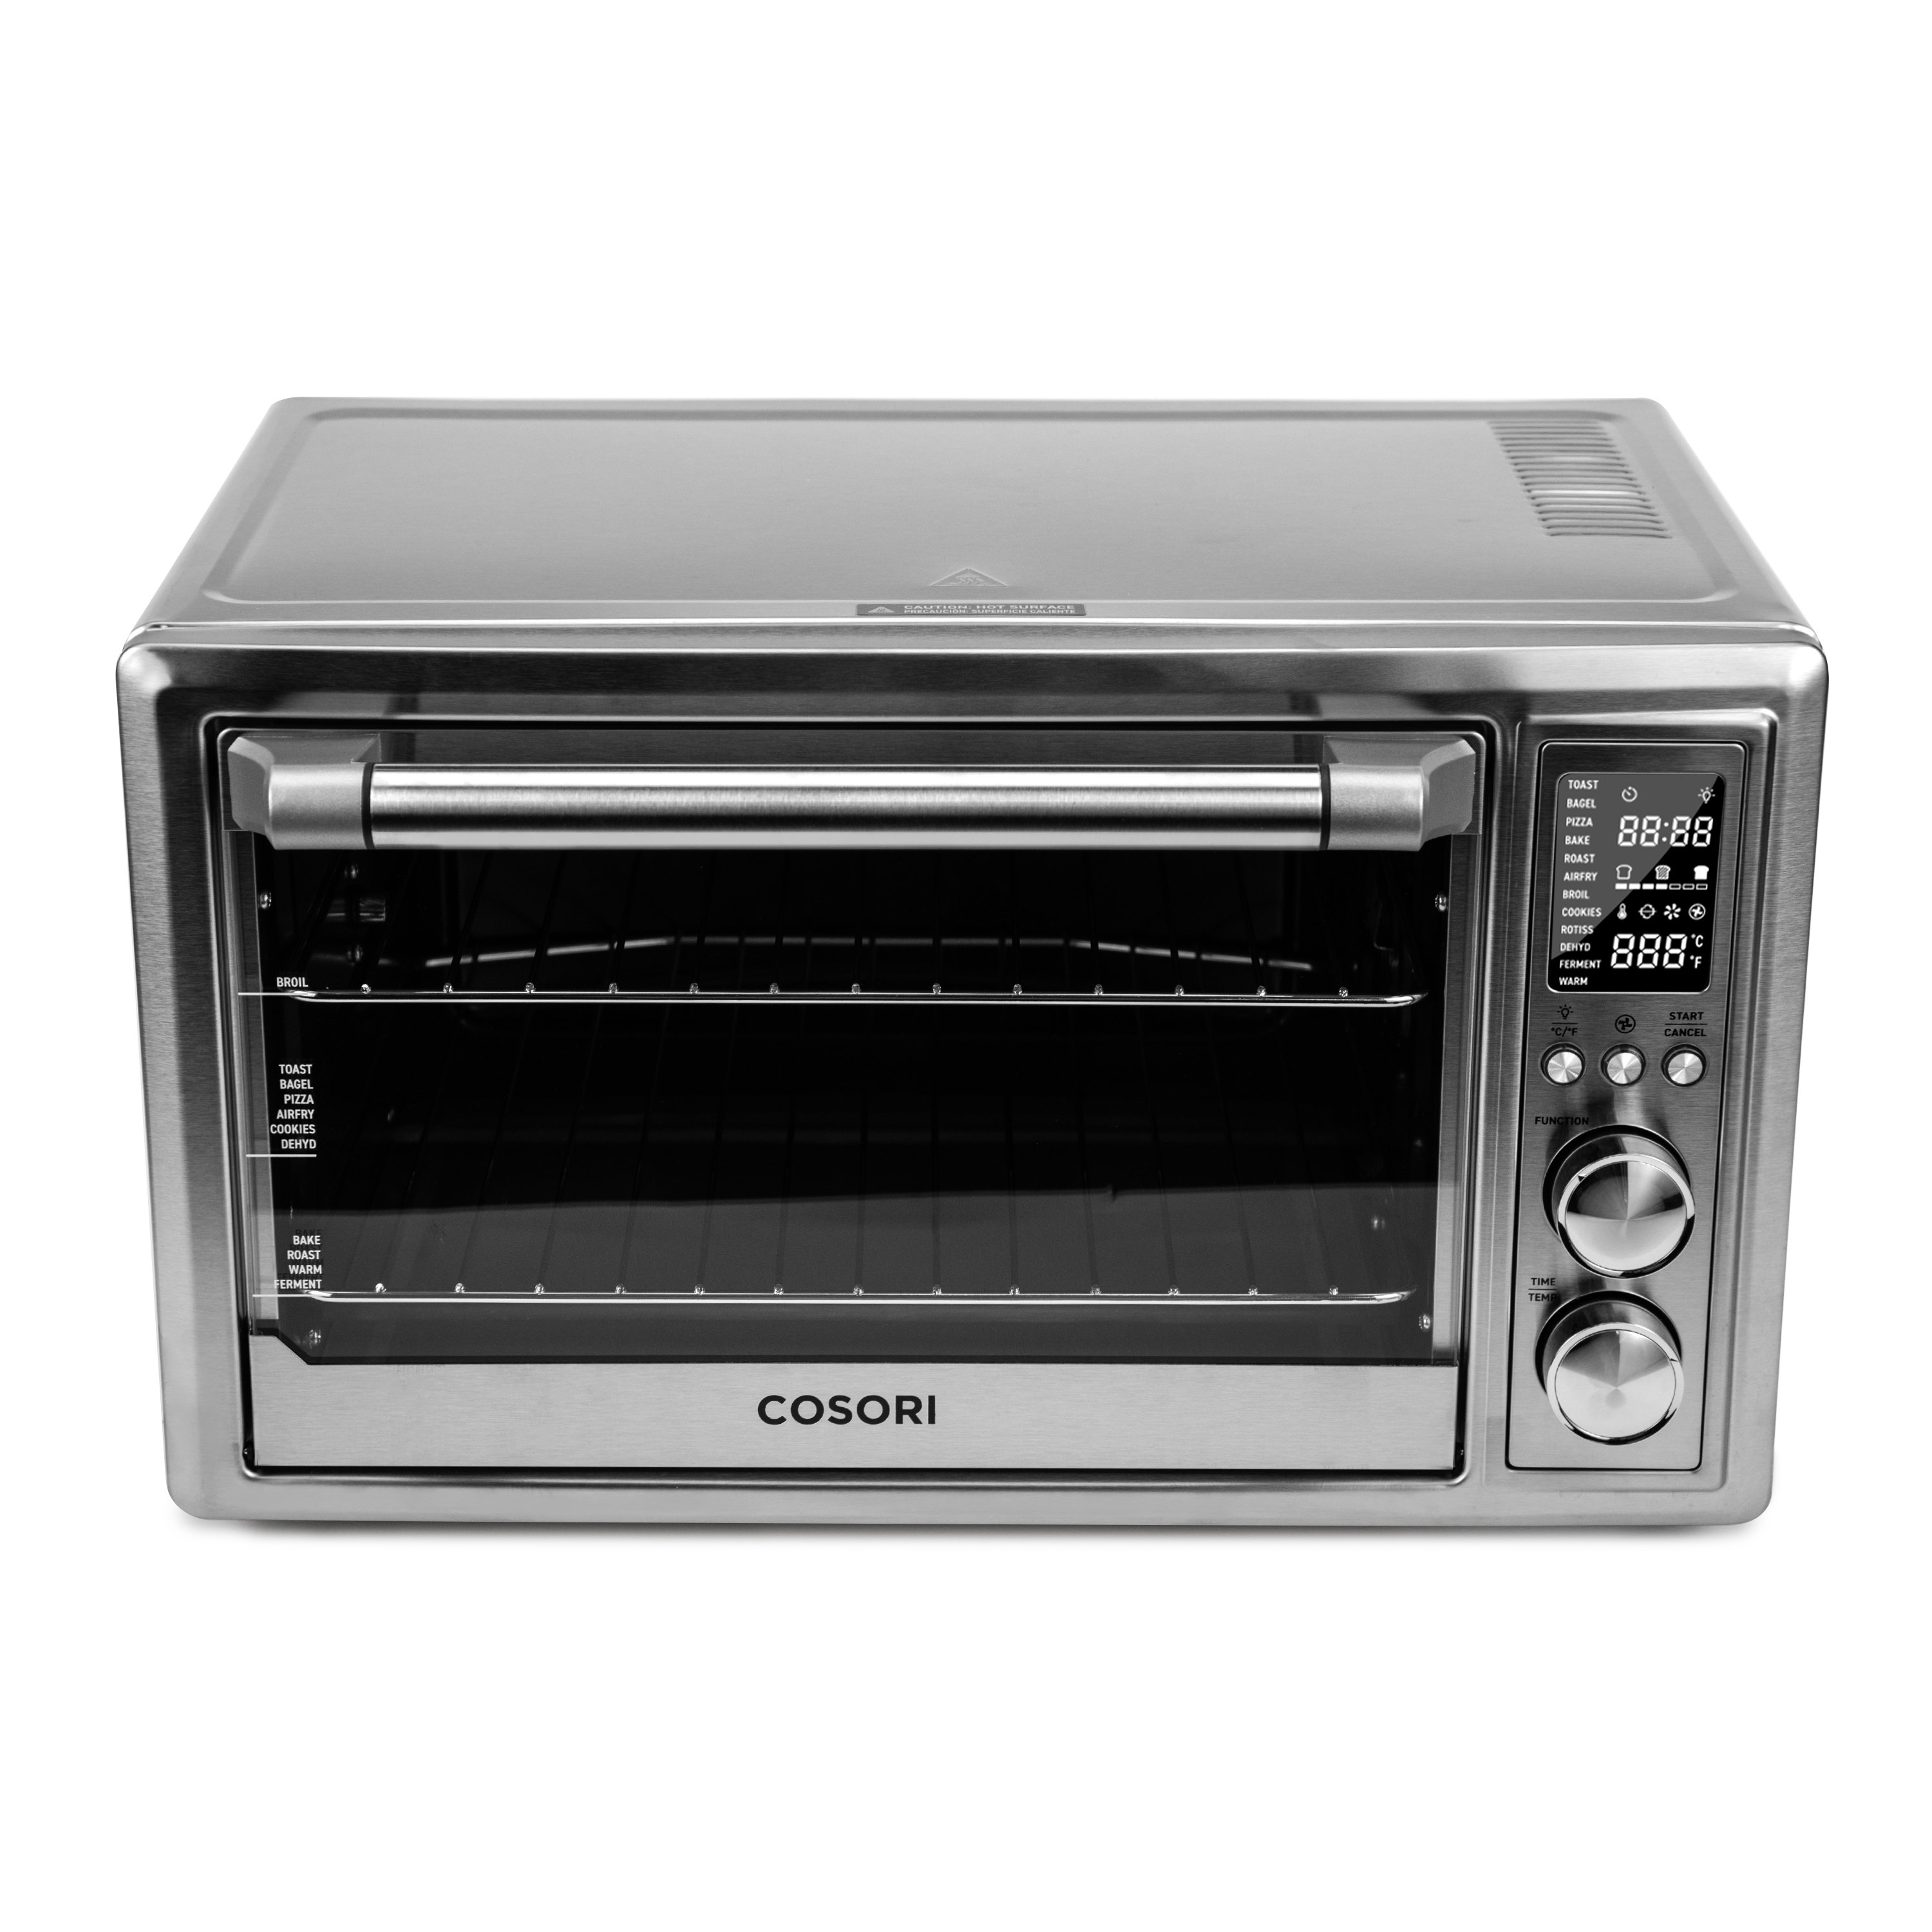  COSORI Air Fryer Oven,13 Qt Airfryer Toaster Oven,11